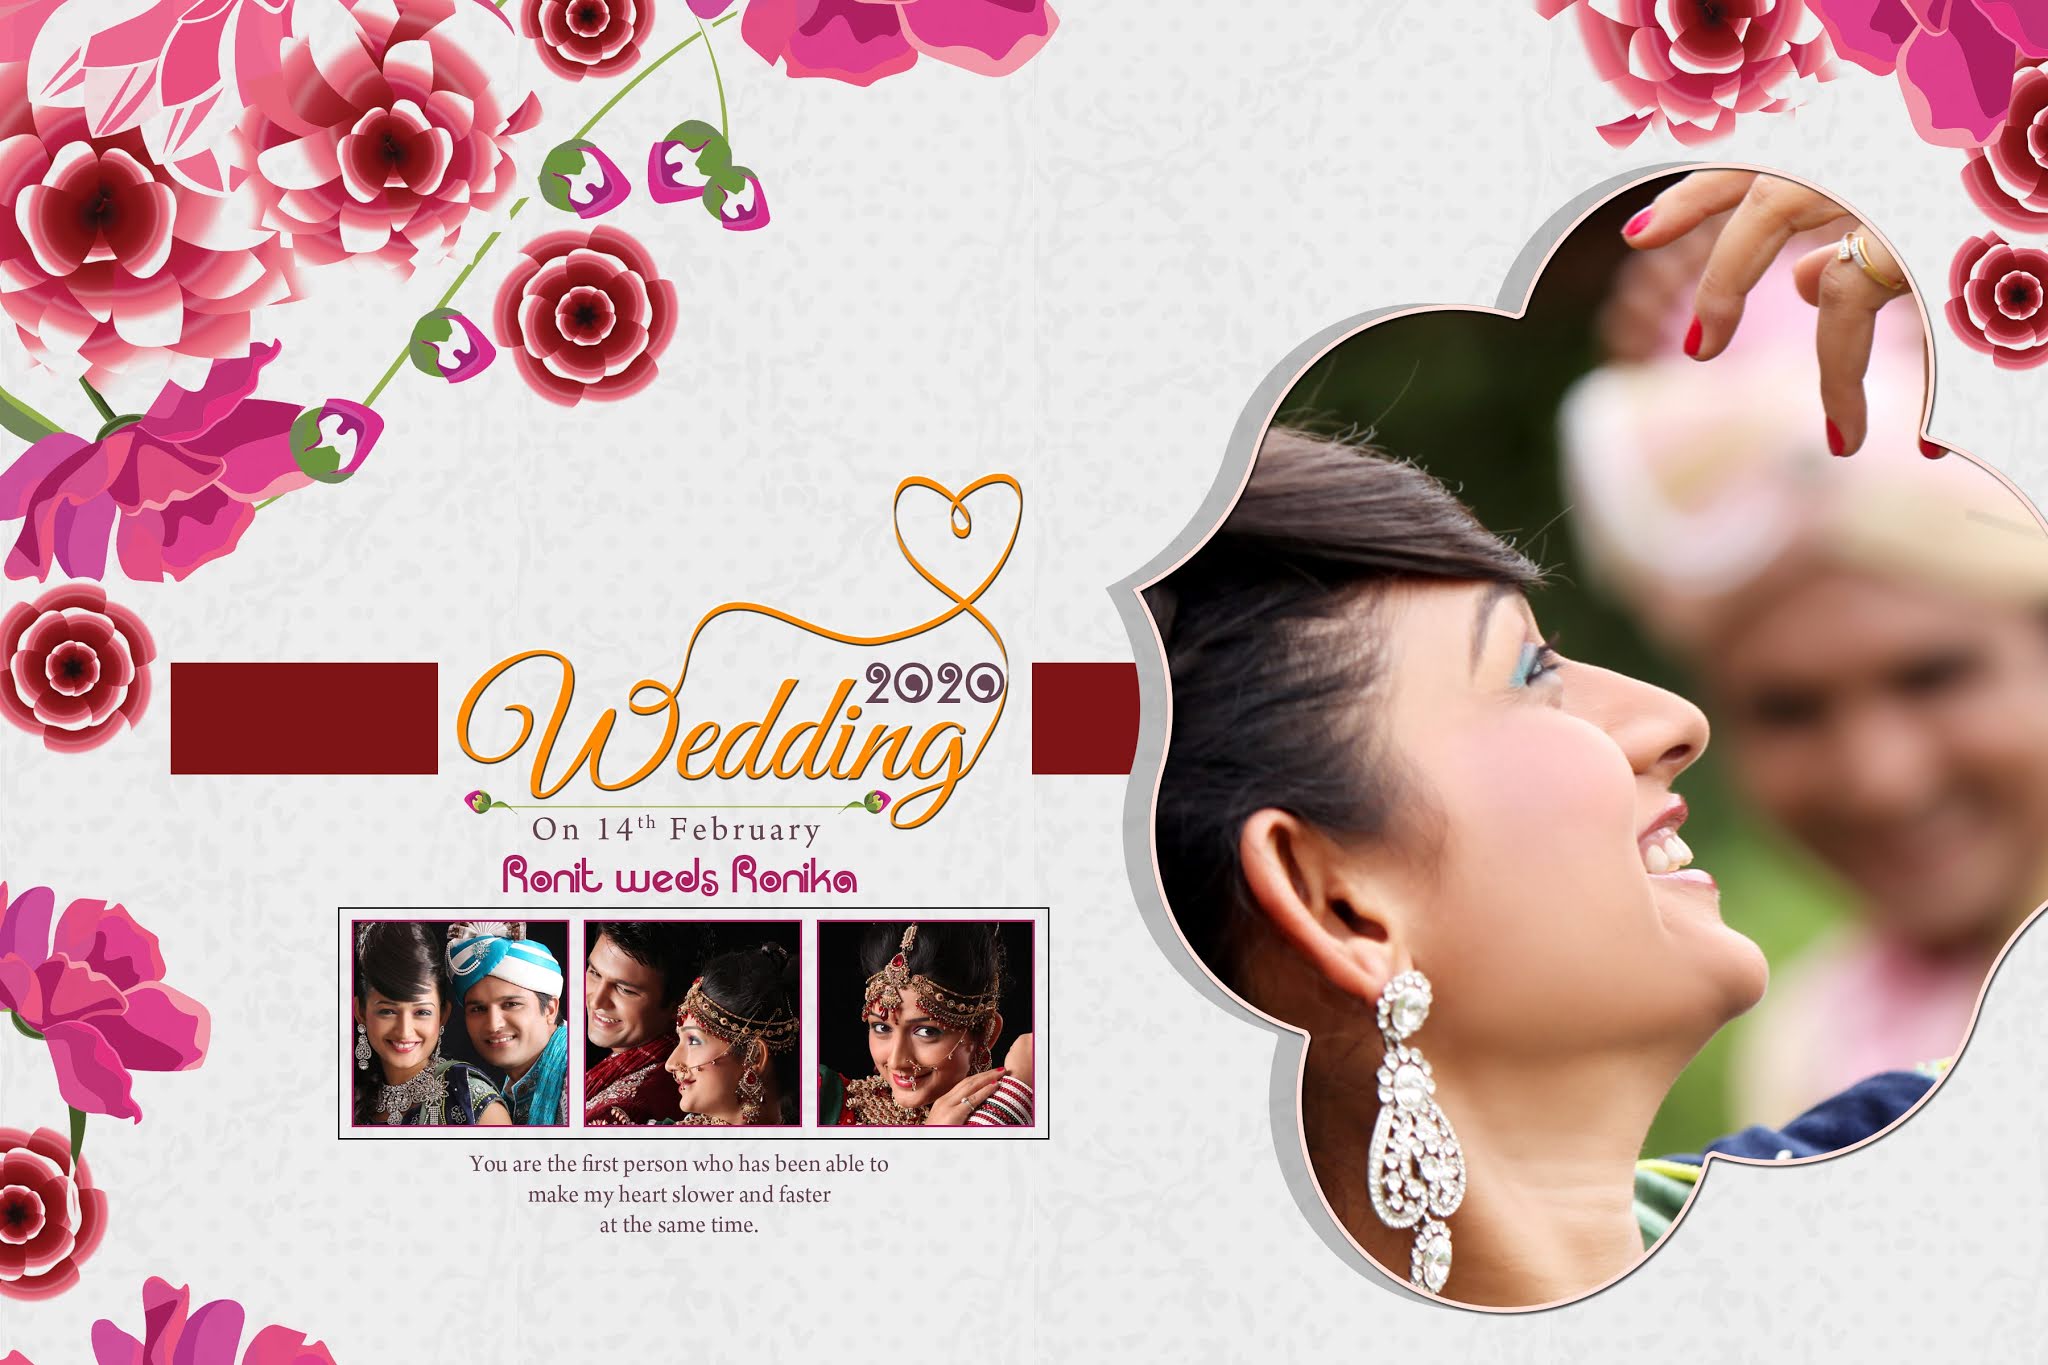 Wedding Album Cover Page Design Psd Free Download | CLOUD HOT GIRL